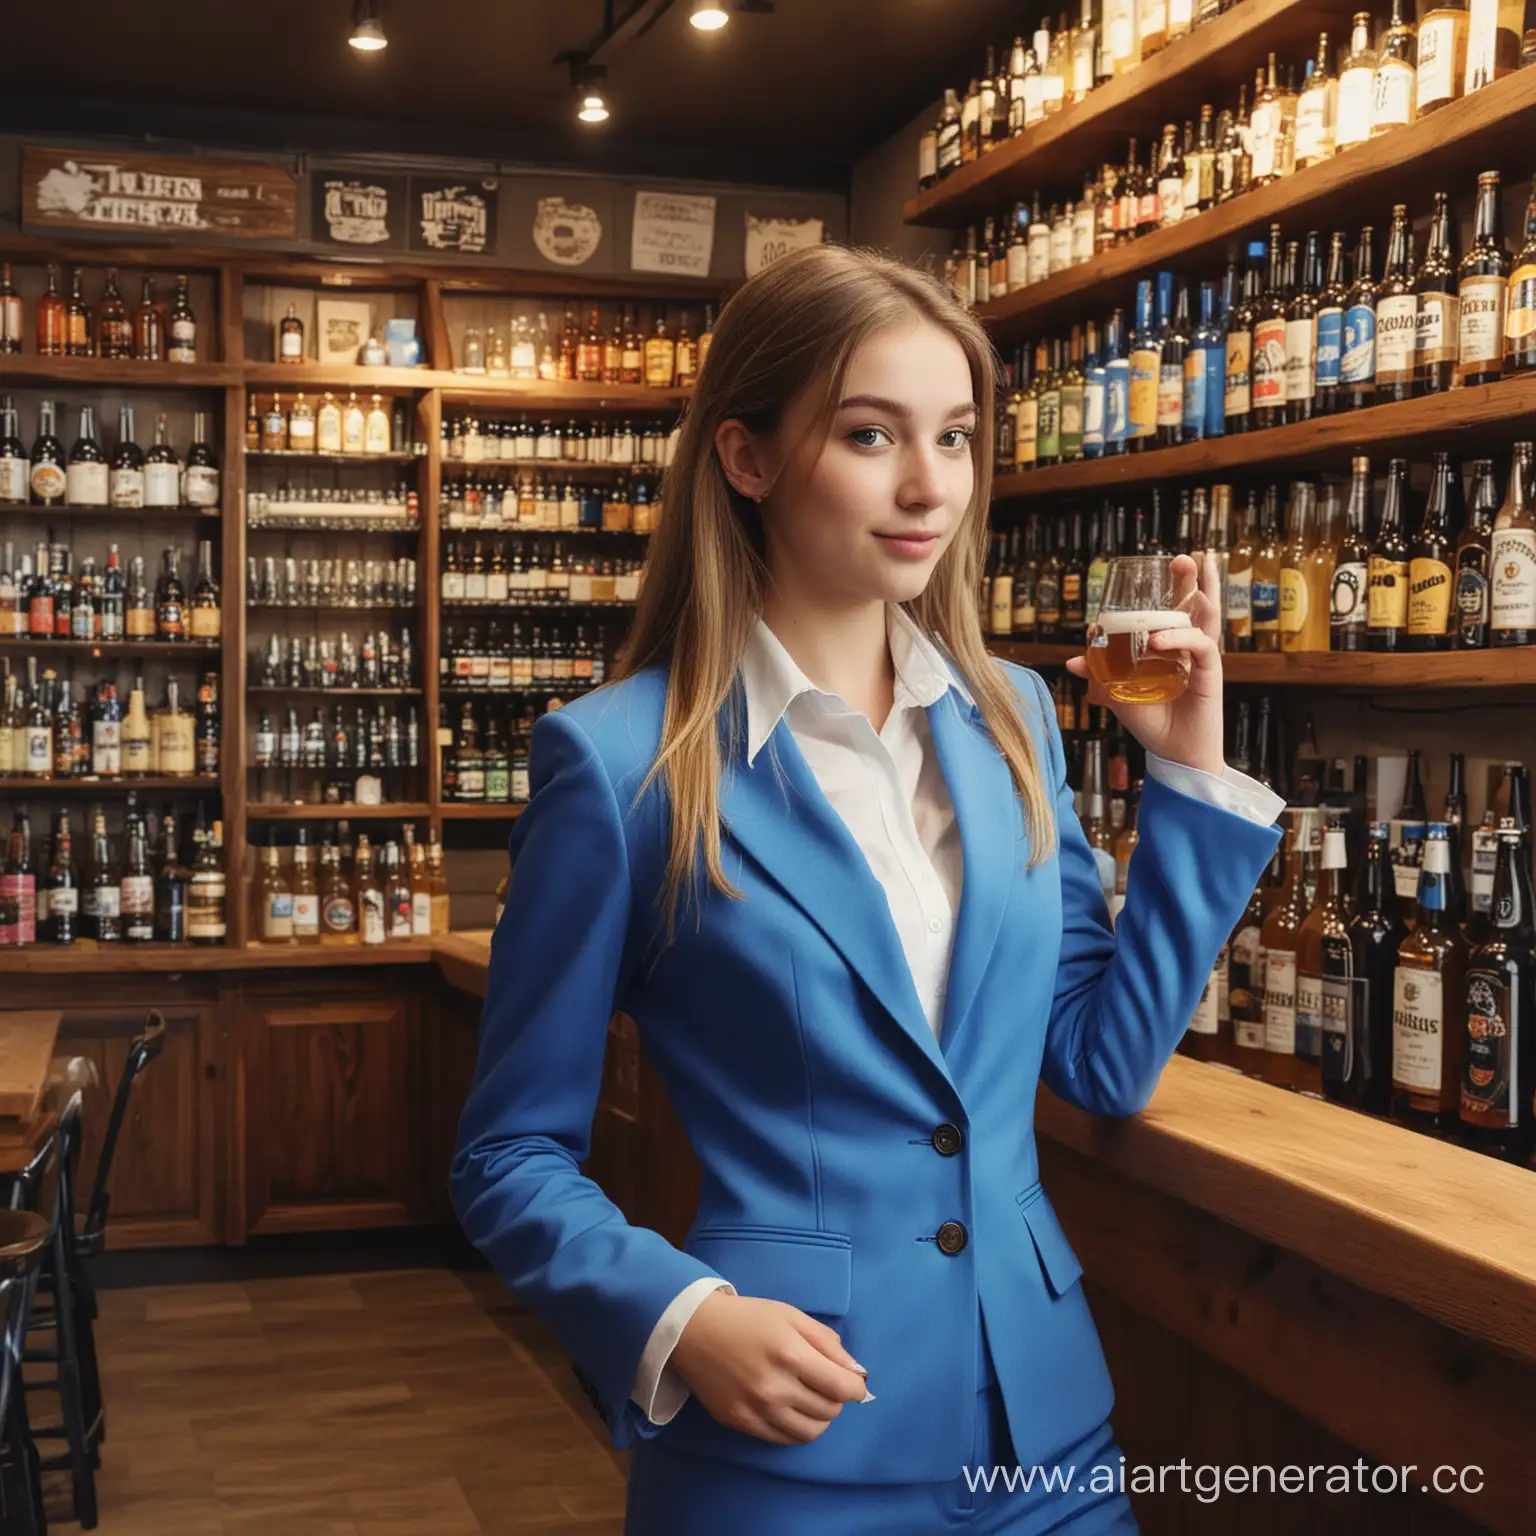 Girl-in-Blue-Suit-Shopping-at-Beer-Shop